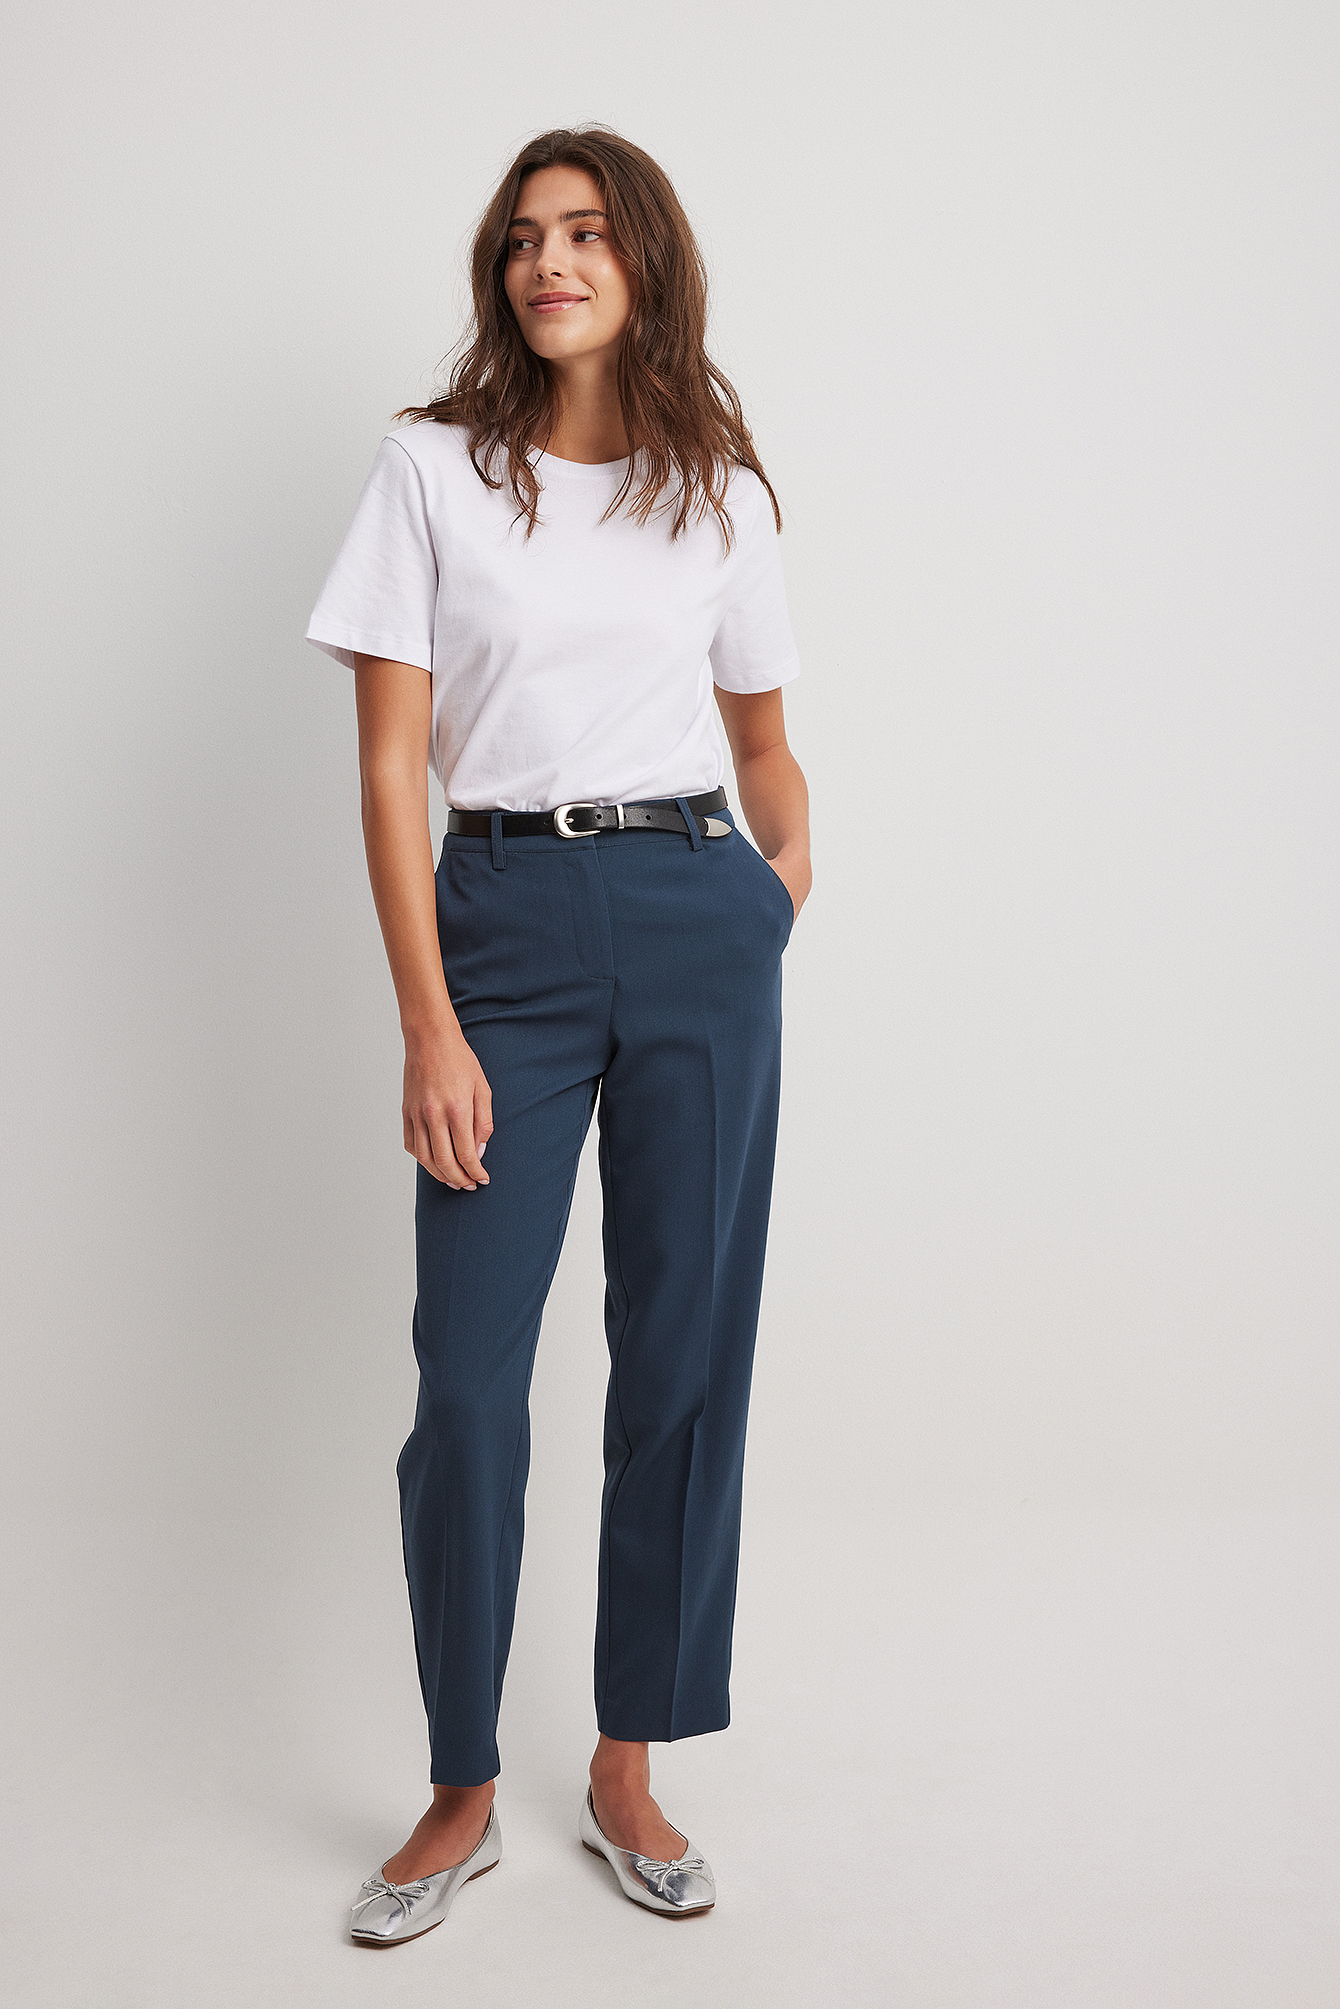 High-waisted tailored trousers - Navy blue - Ladies